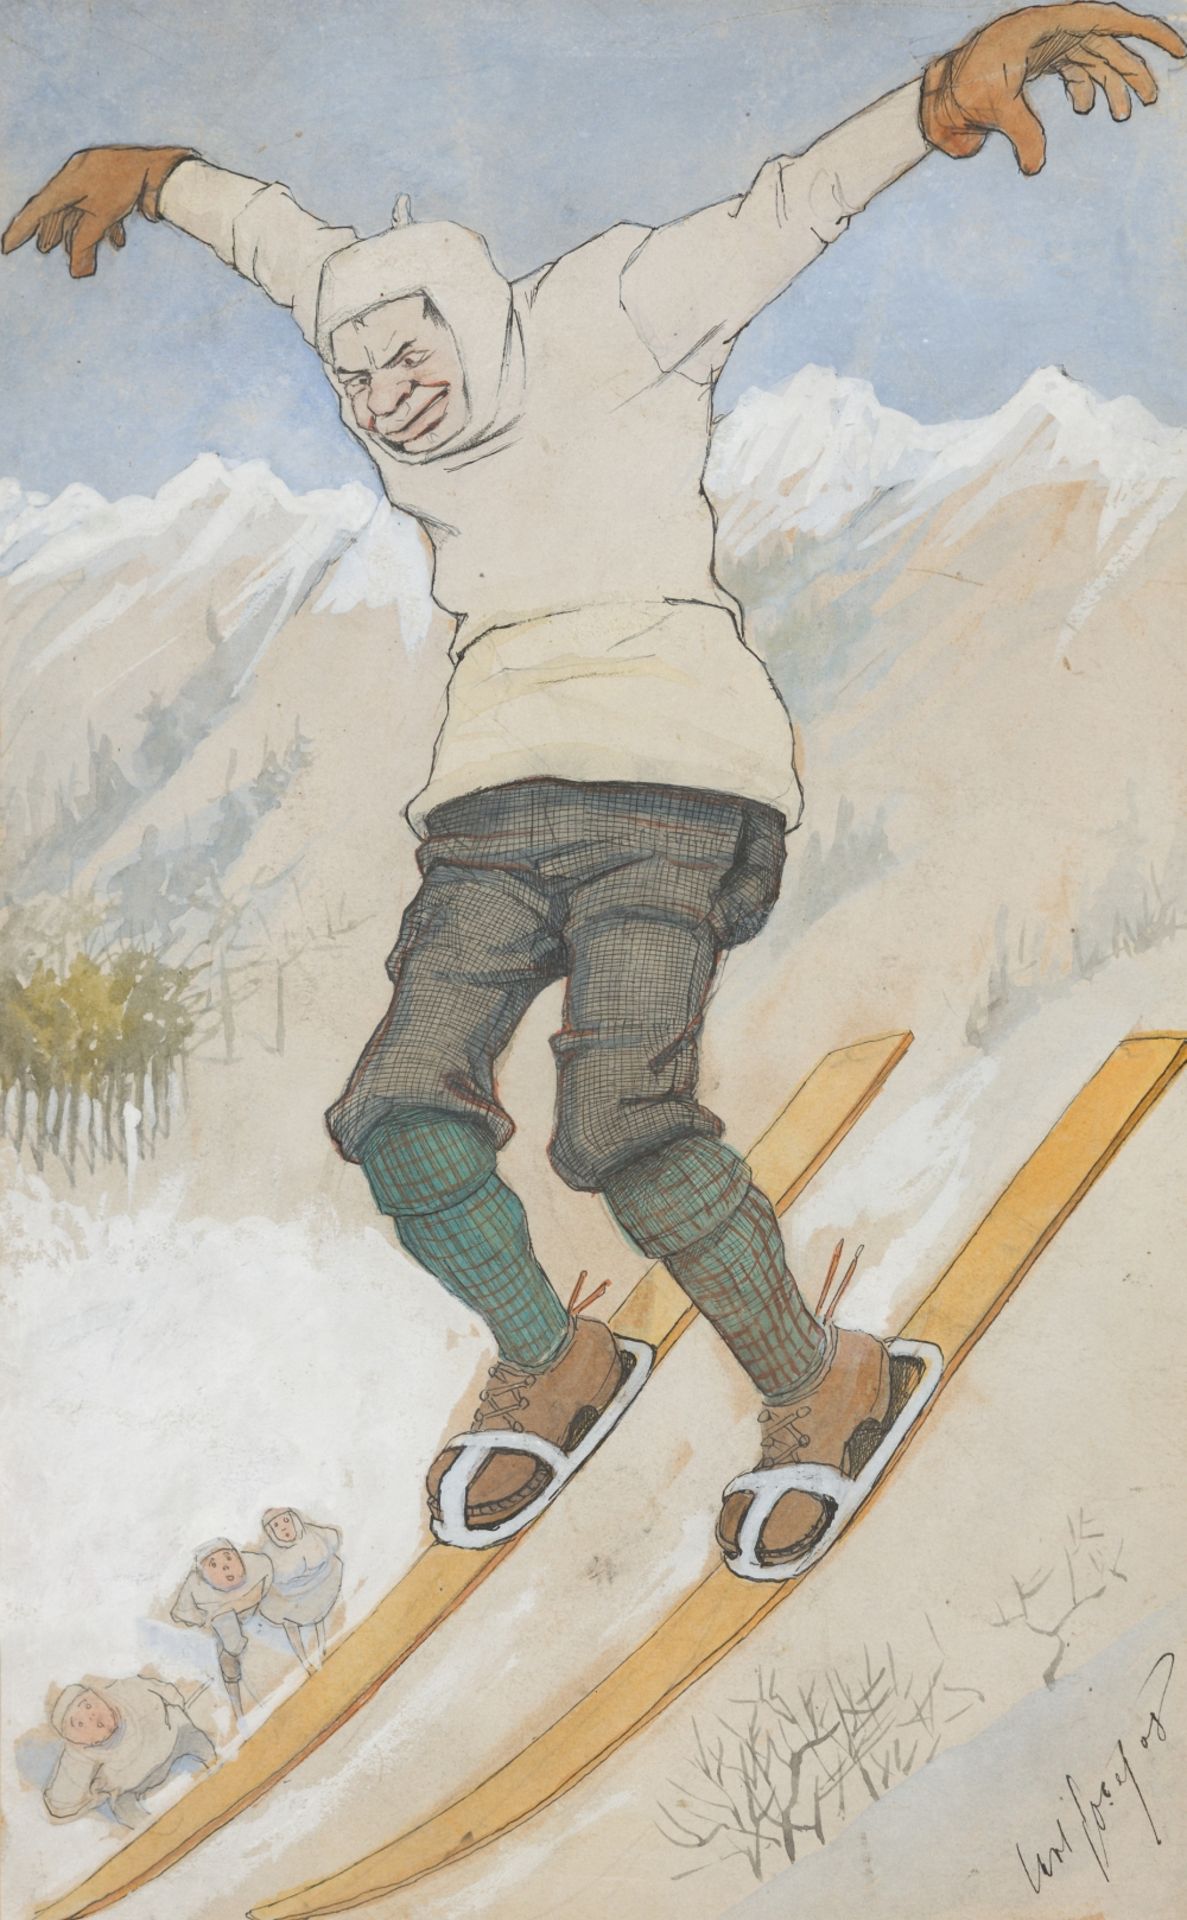 Pollak, Carl Josef(1877-1937)Ski Jumper (19)08ink and gouache on papersigned and dated lower